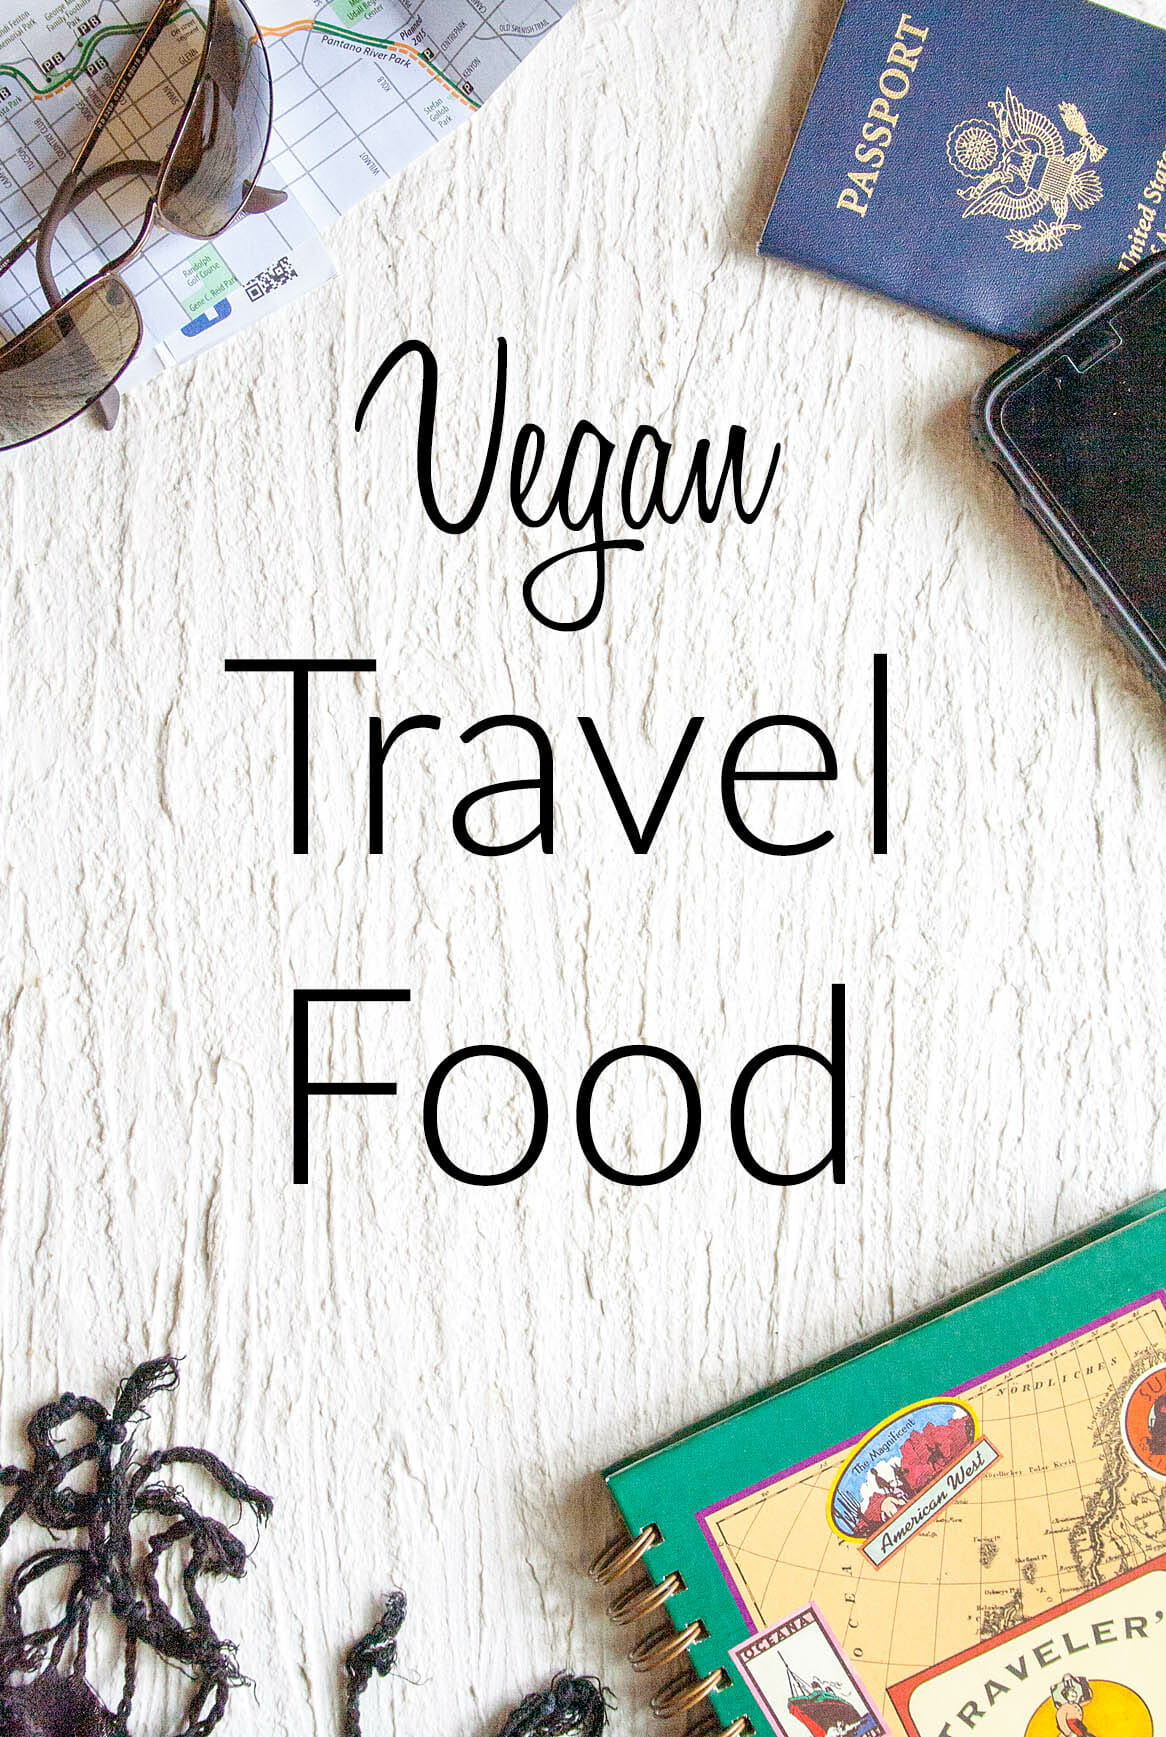 Sunglasses, map, passport, phone, scarf and travel journal on a white background with the text, "Vegan Travel Food" written on it.